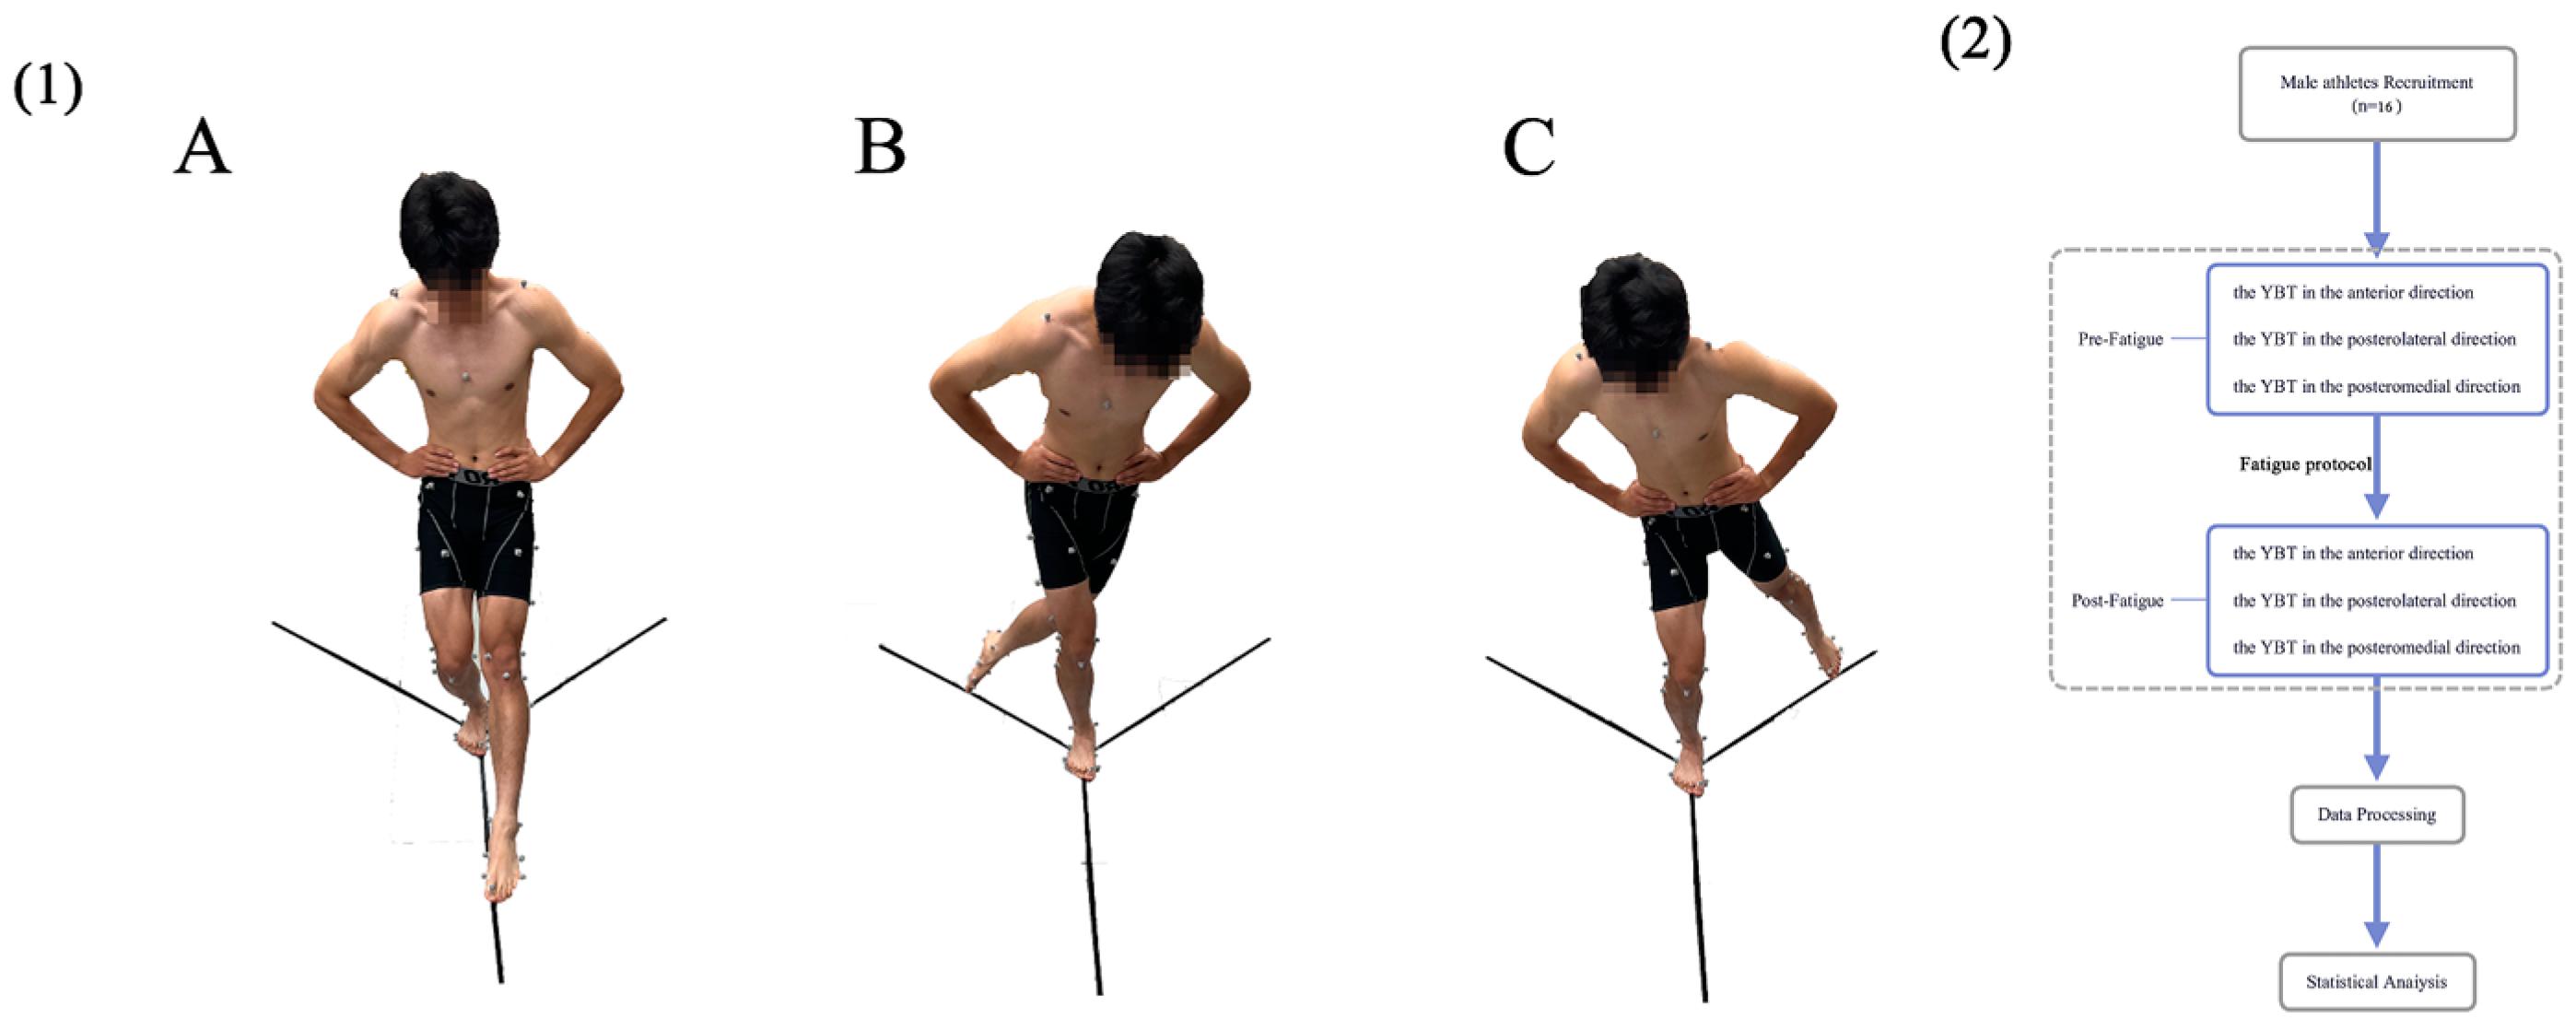 Healthcare Free Full-Text The Effects of Fatigue on the Lower Limb Biomechanics of Amateur Athletes during a Y-Balance Test photo photo picture